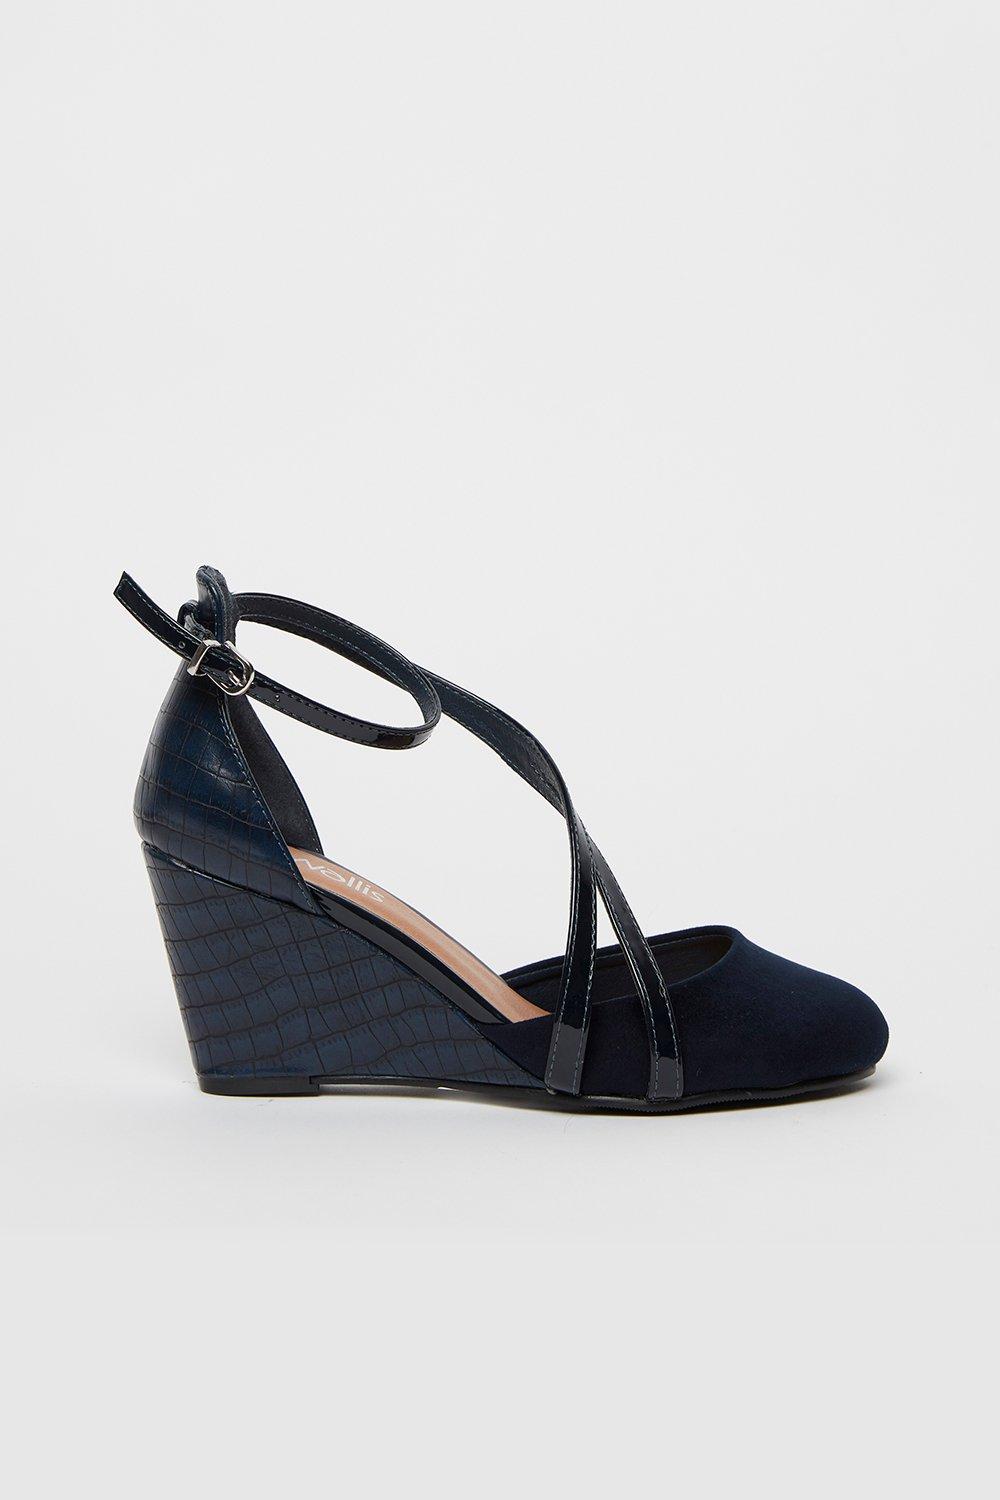 The Stylish Shoes To Add To Your Collection. Contrast Textures And A Strappy Design Keep These On-Trend, Whilst A Pointed Toe And Versatile Navy Hue Bring Timeless Style. Heel Height: 80Mm Standard Fit Polyurethane. Wipe Clean Only. Stlye: Coralee